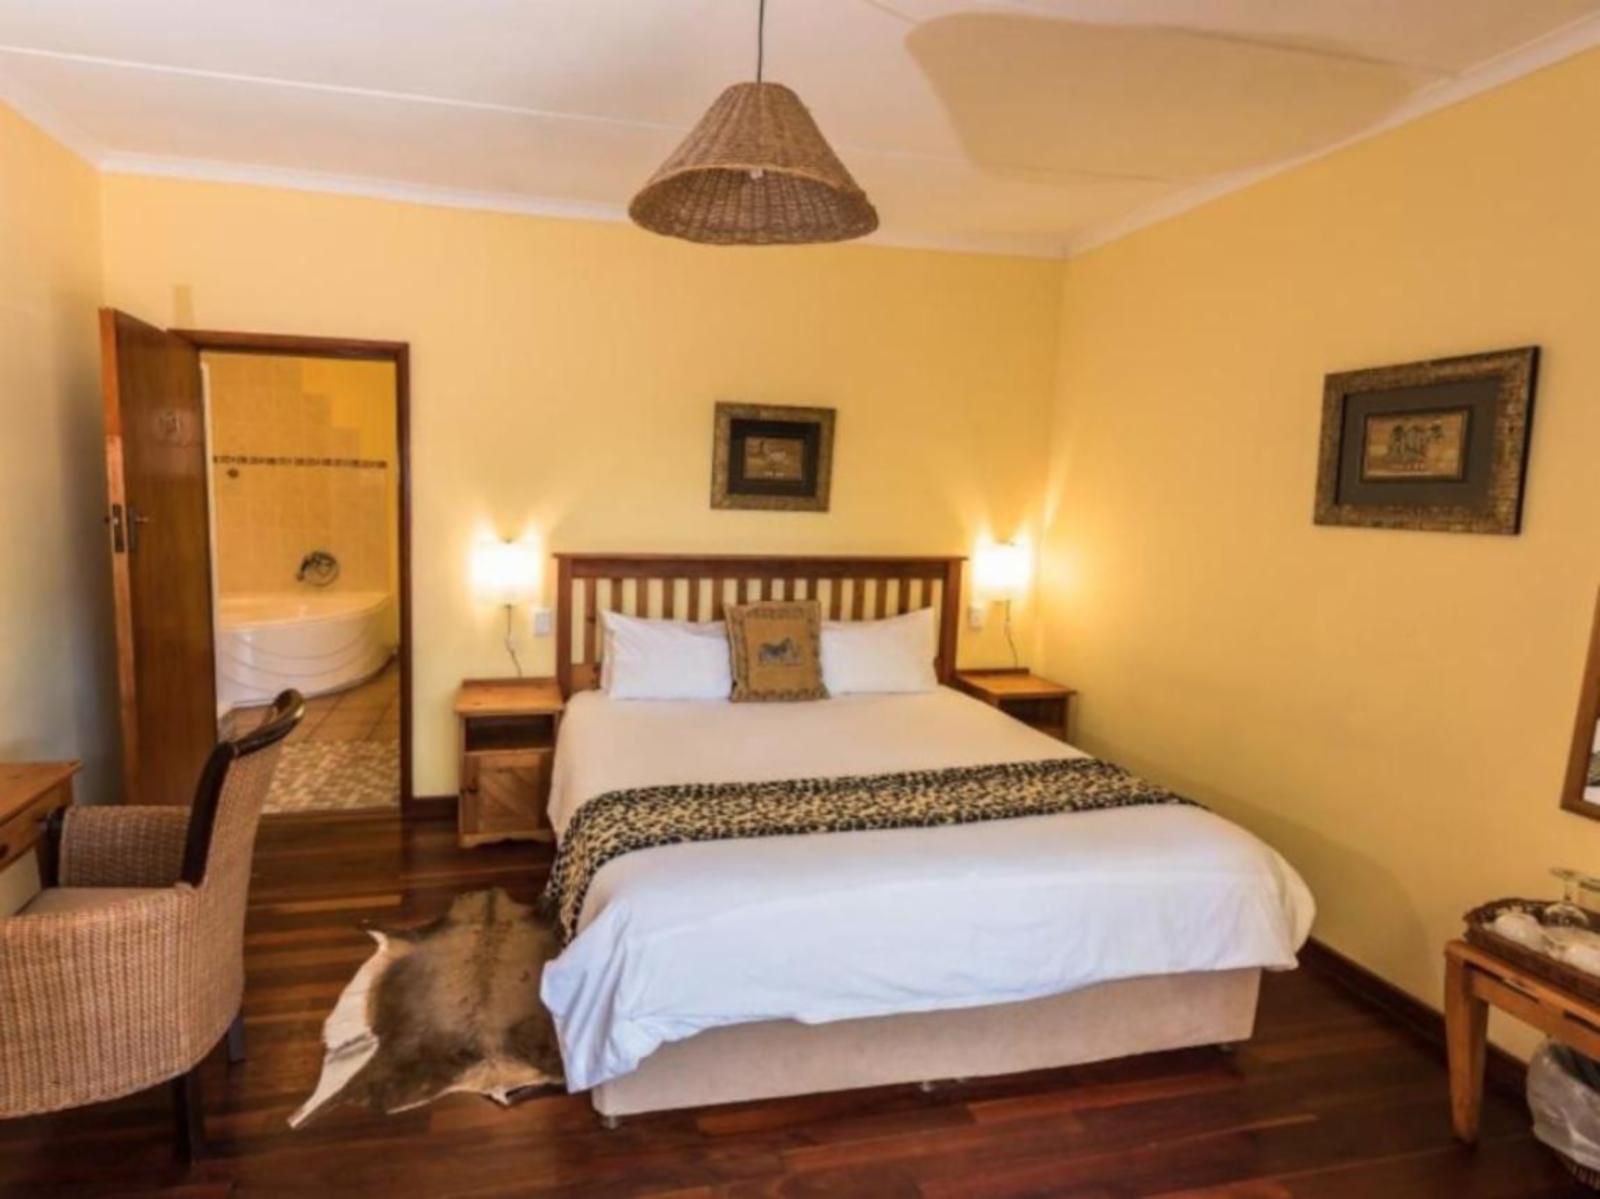 French Lodge International Dormehlsdrift George Western Cape South Africa Colorful, Bedroom